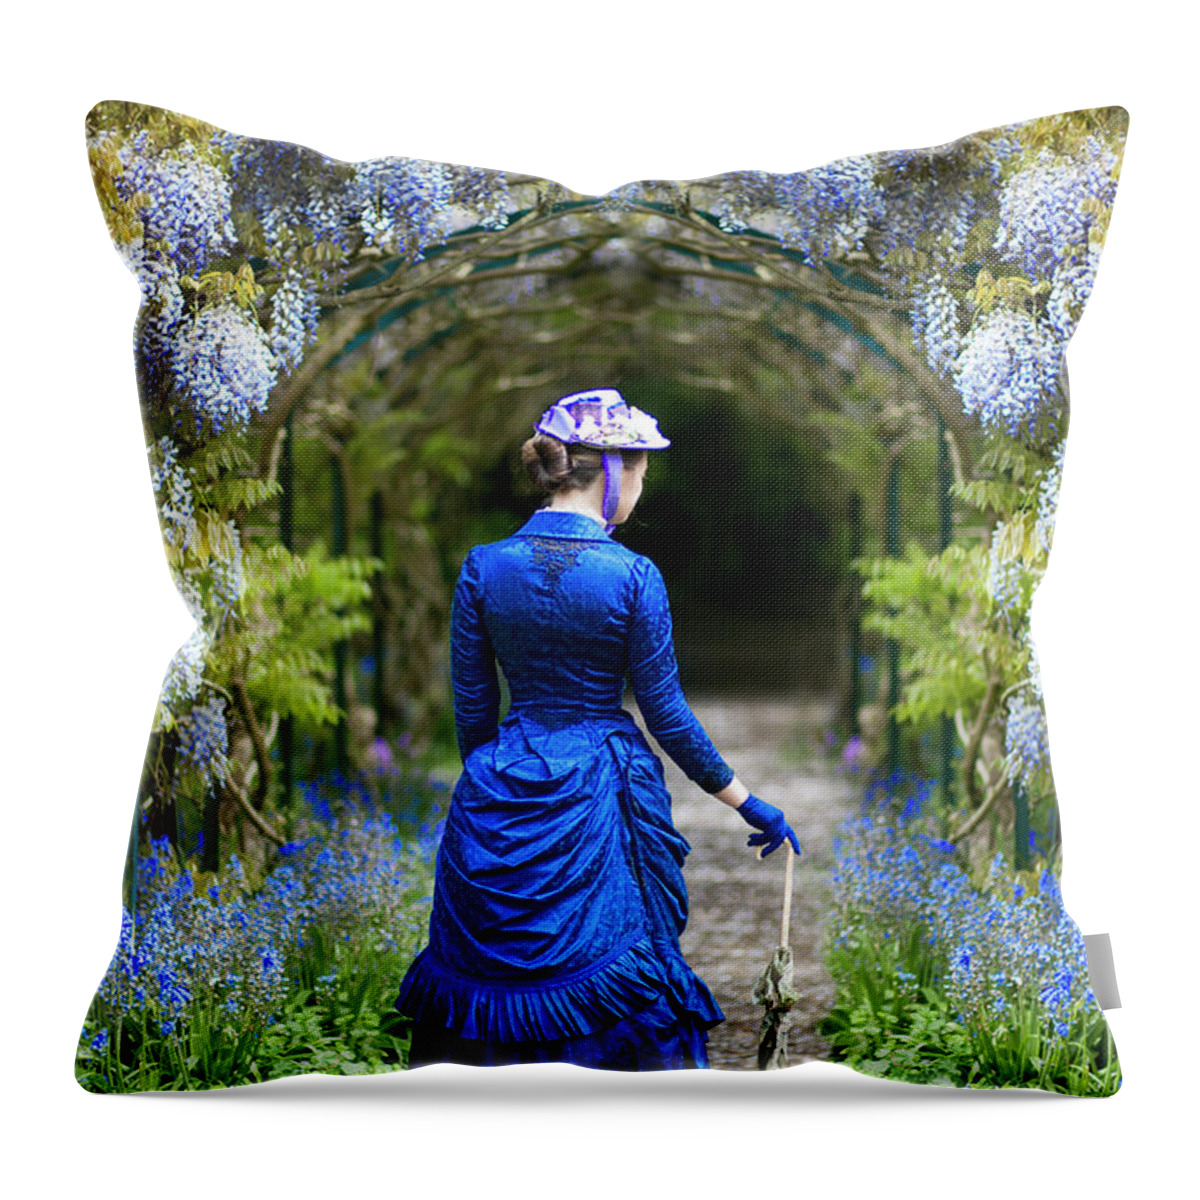 Victorian Throw Pillow featuring the photograph Victorian Woman With Wisteria by Lee Avison